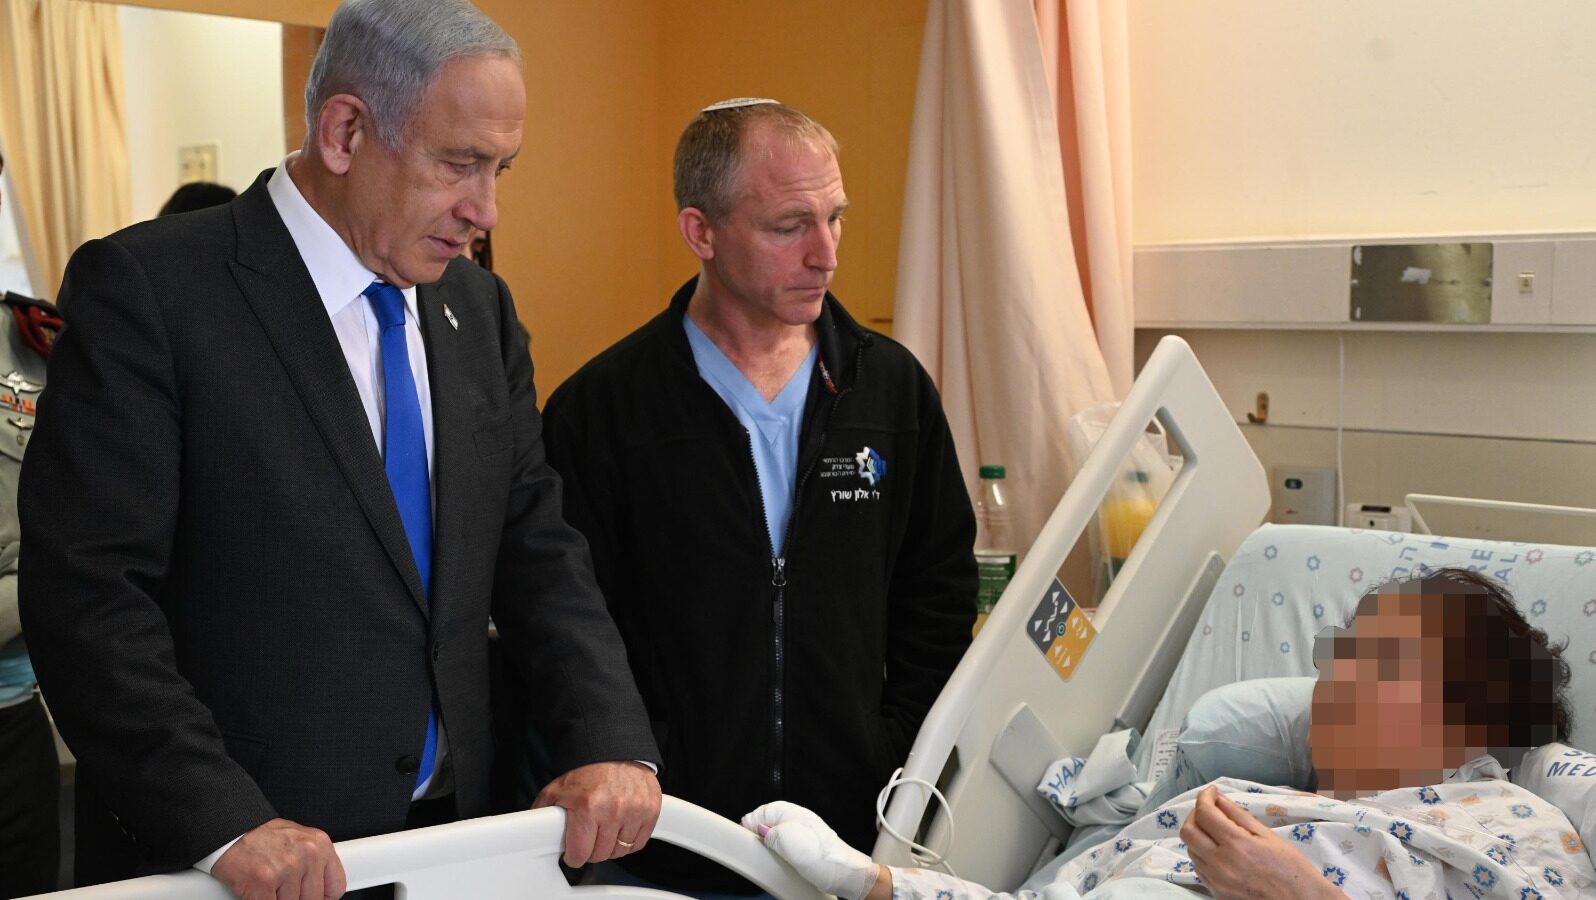 Netanyahu Visits Attack Victims, Announces Steps To Fight Terrorism